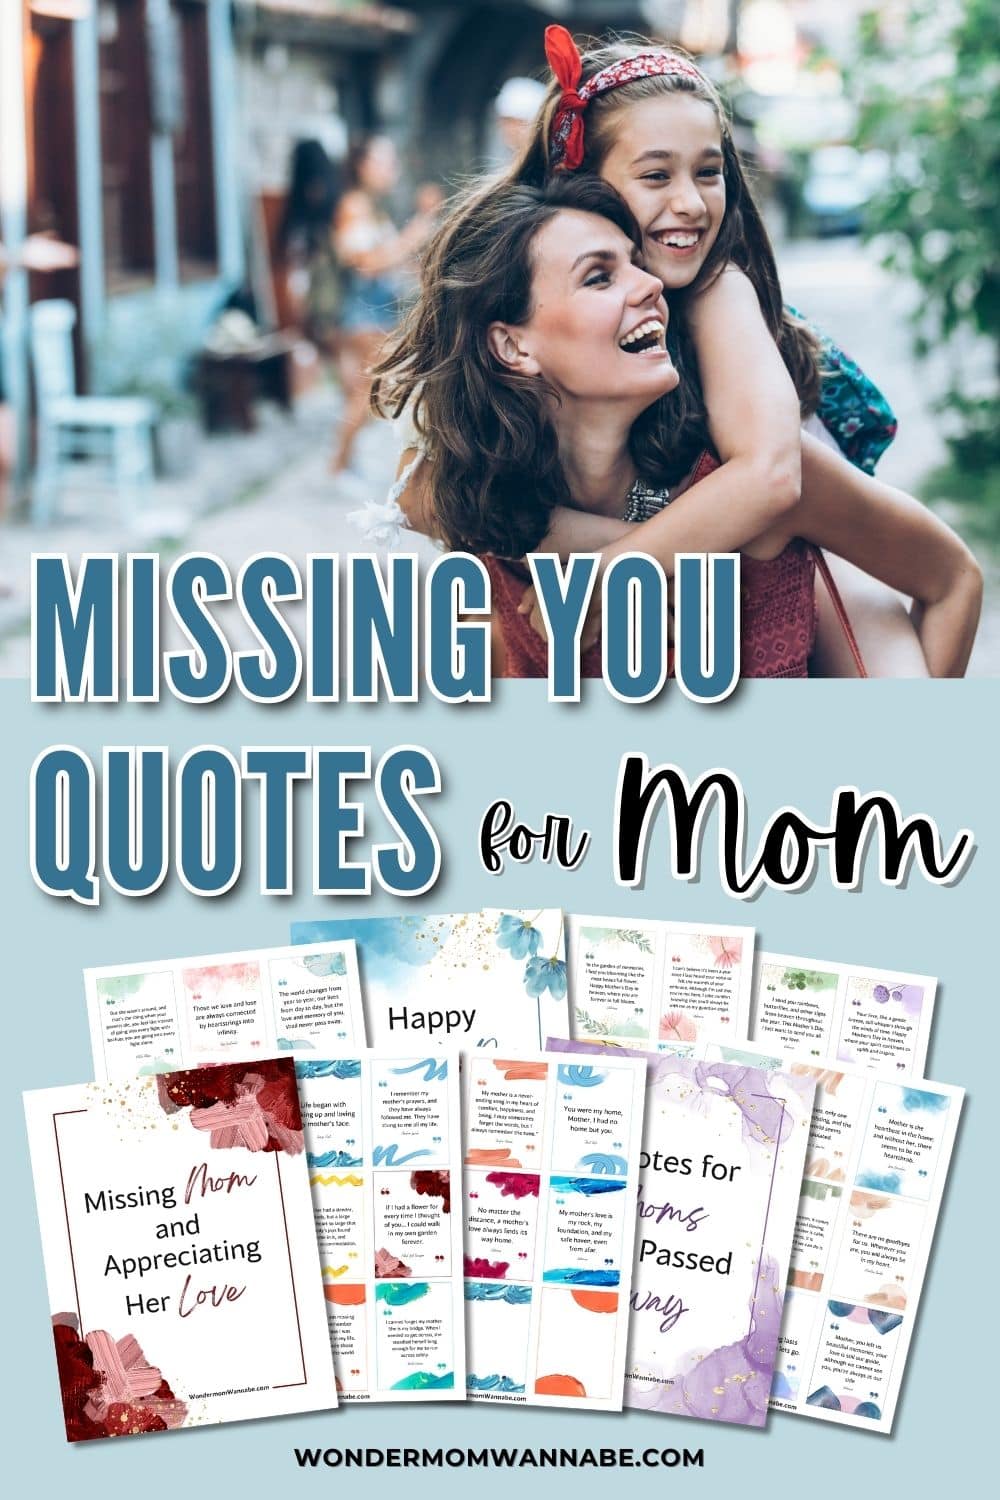 Missing you quotes for mom. Share these heartfelt and touching messages to express your longing and love for your dear mother. These quotes serve as a gentle reminder of the deep bond that exists between a mother and